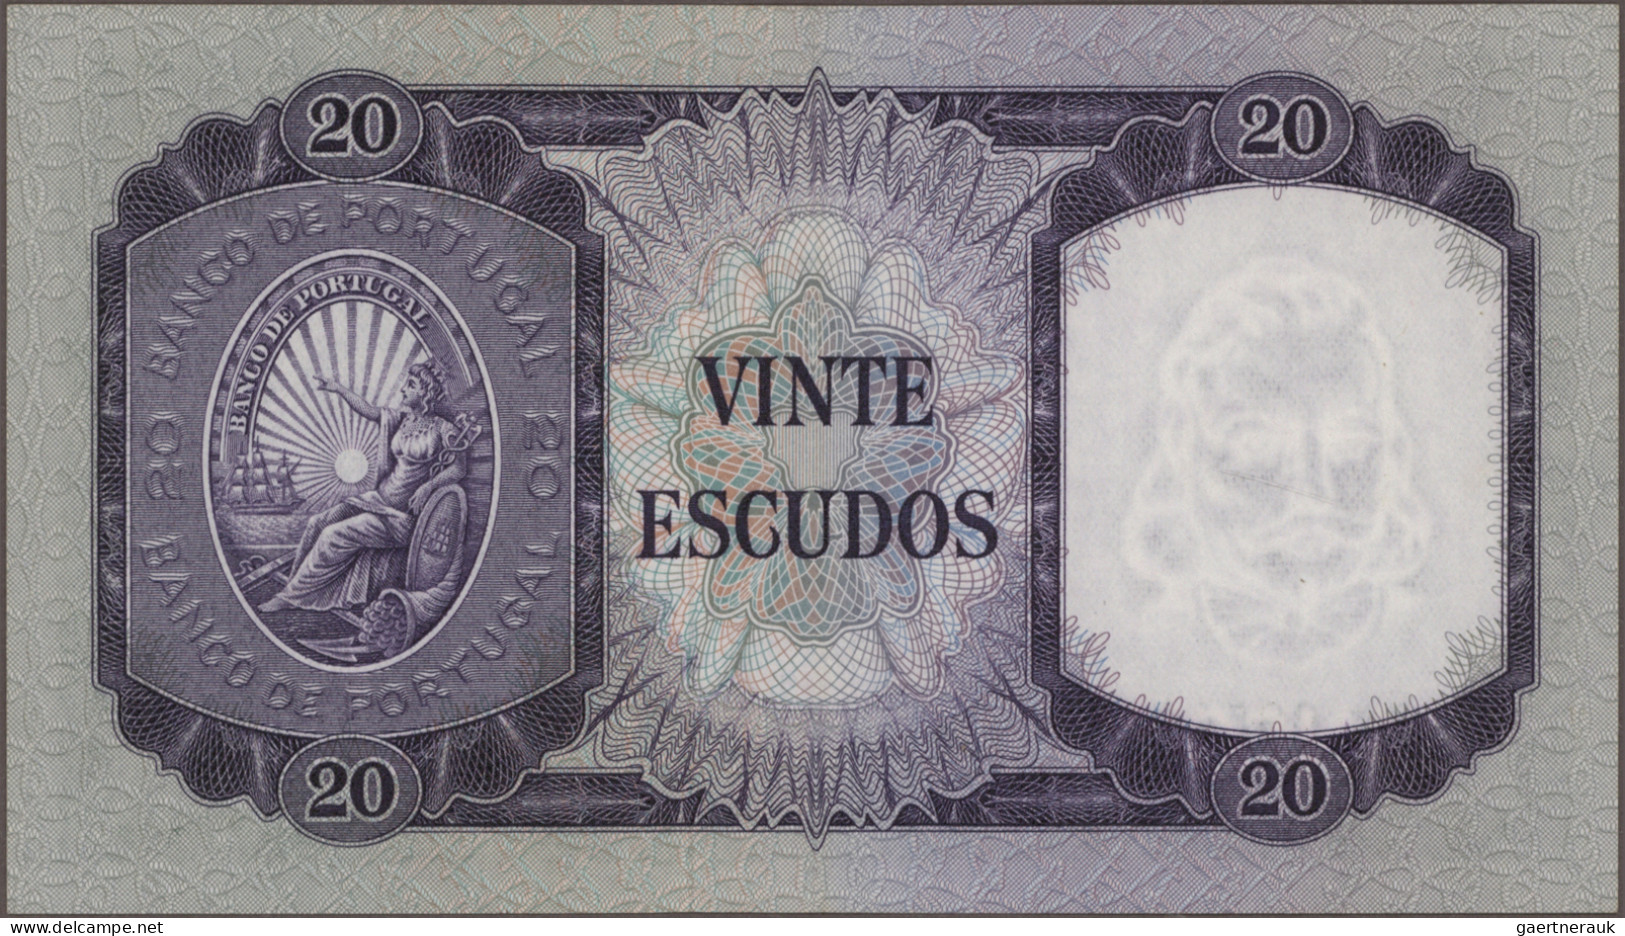 Portugal: Banco de Portugal, set with 4 banknotes, series 1960/61, with 20, 50,